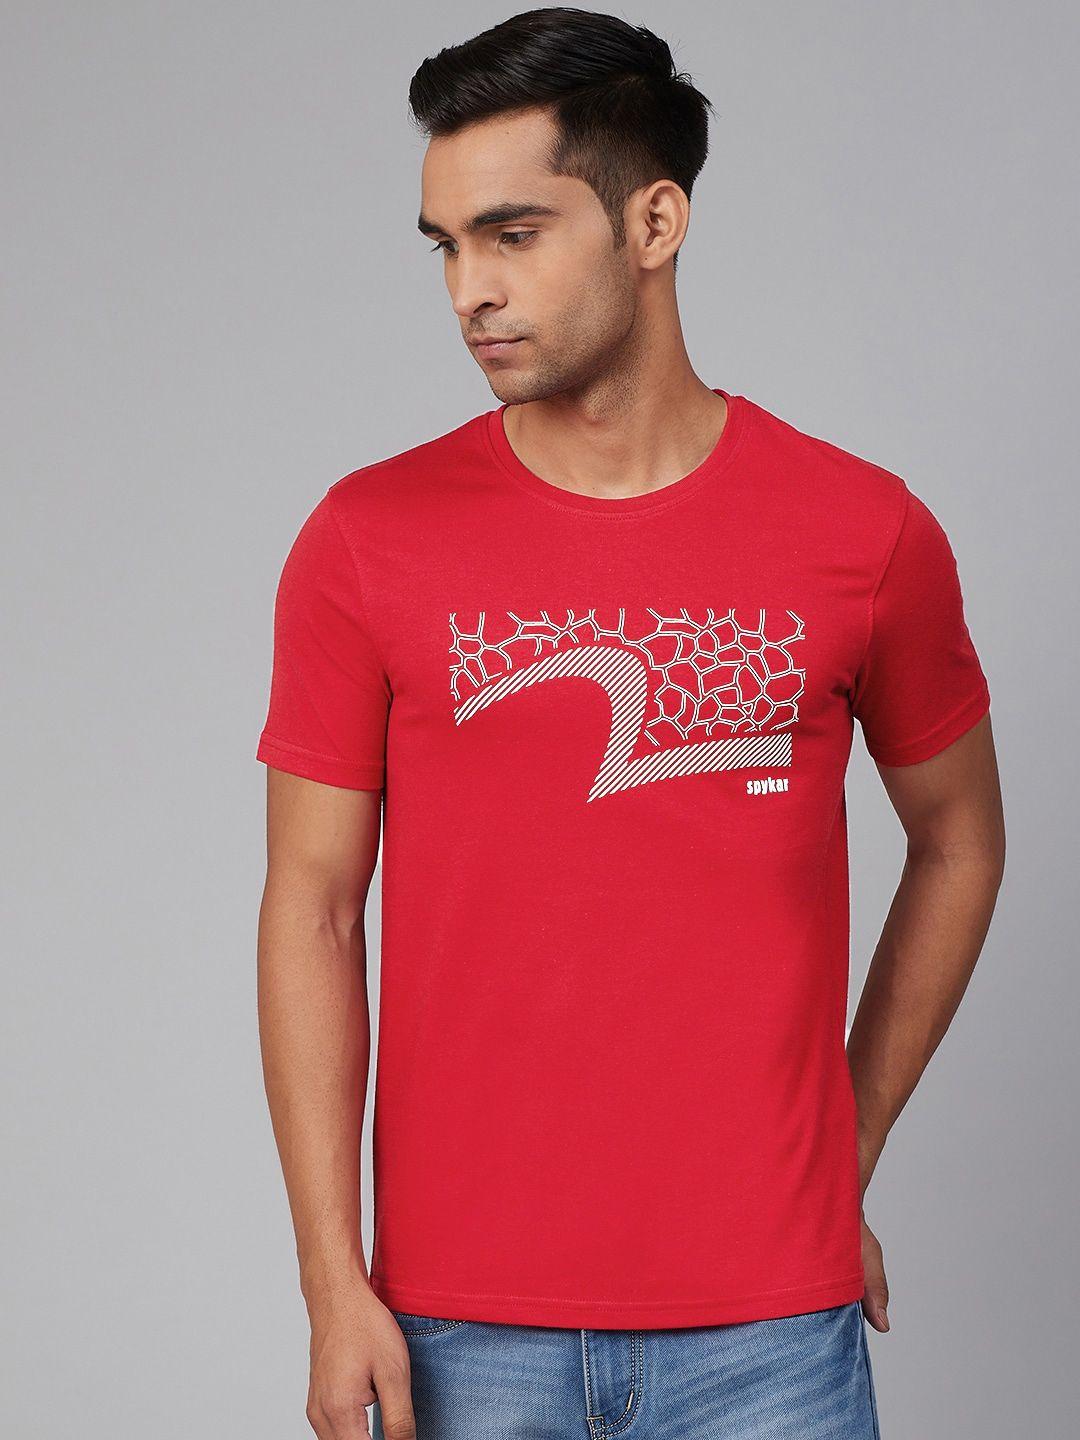 underjeans-by-spykar-men-red-&-white-printed-round-neck-t-shirt